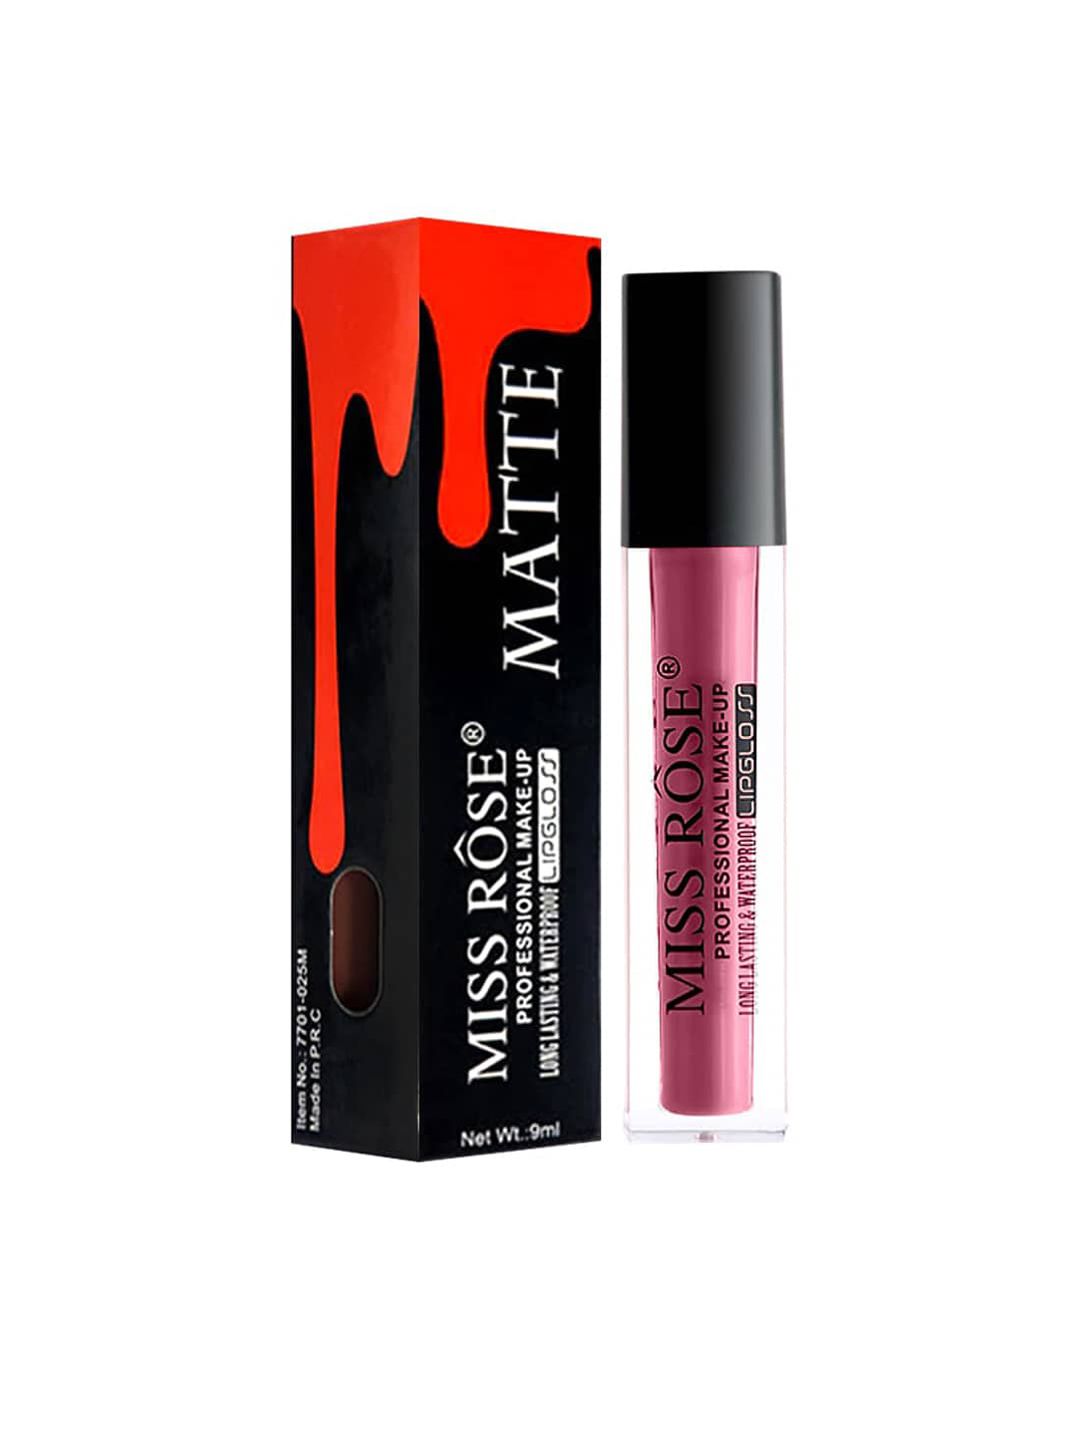 MISS ROSE Shiny Liquid LipGloss 7701-020 09 20 gm Price in India